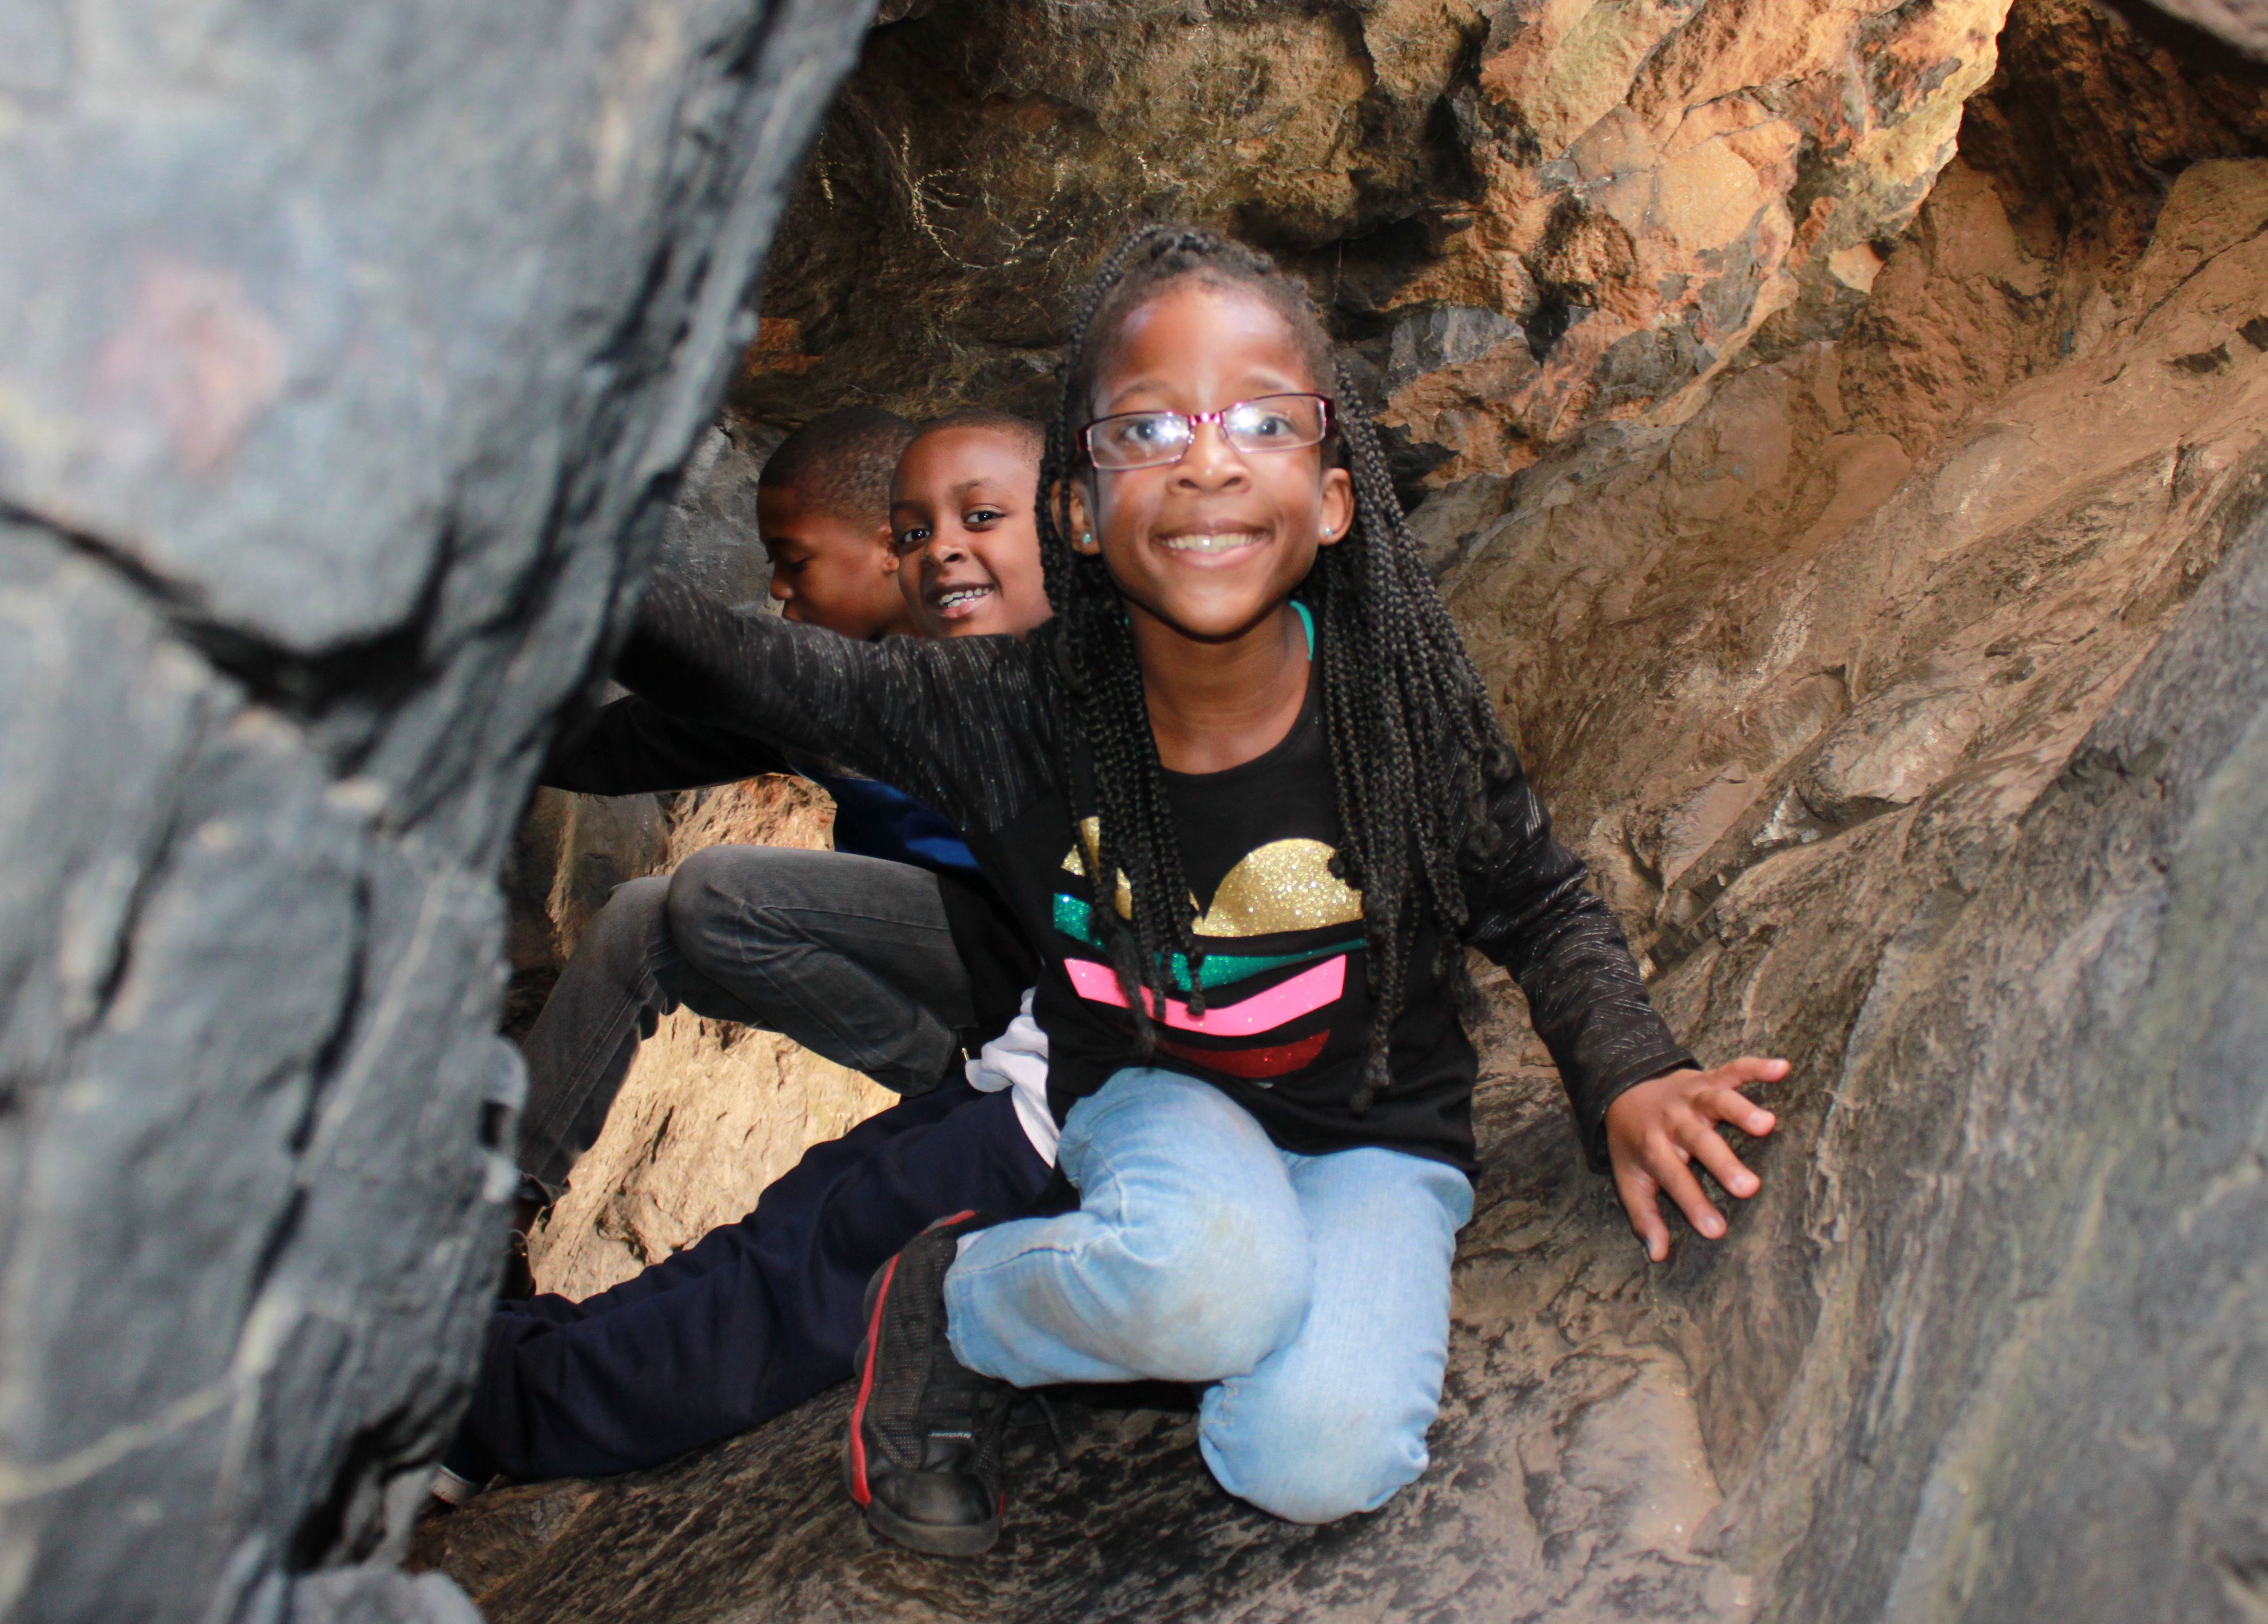 Playing in Judges Cave- Nature's own jungle gym